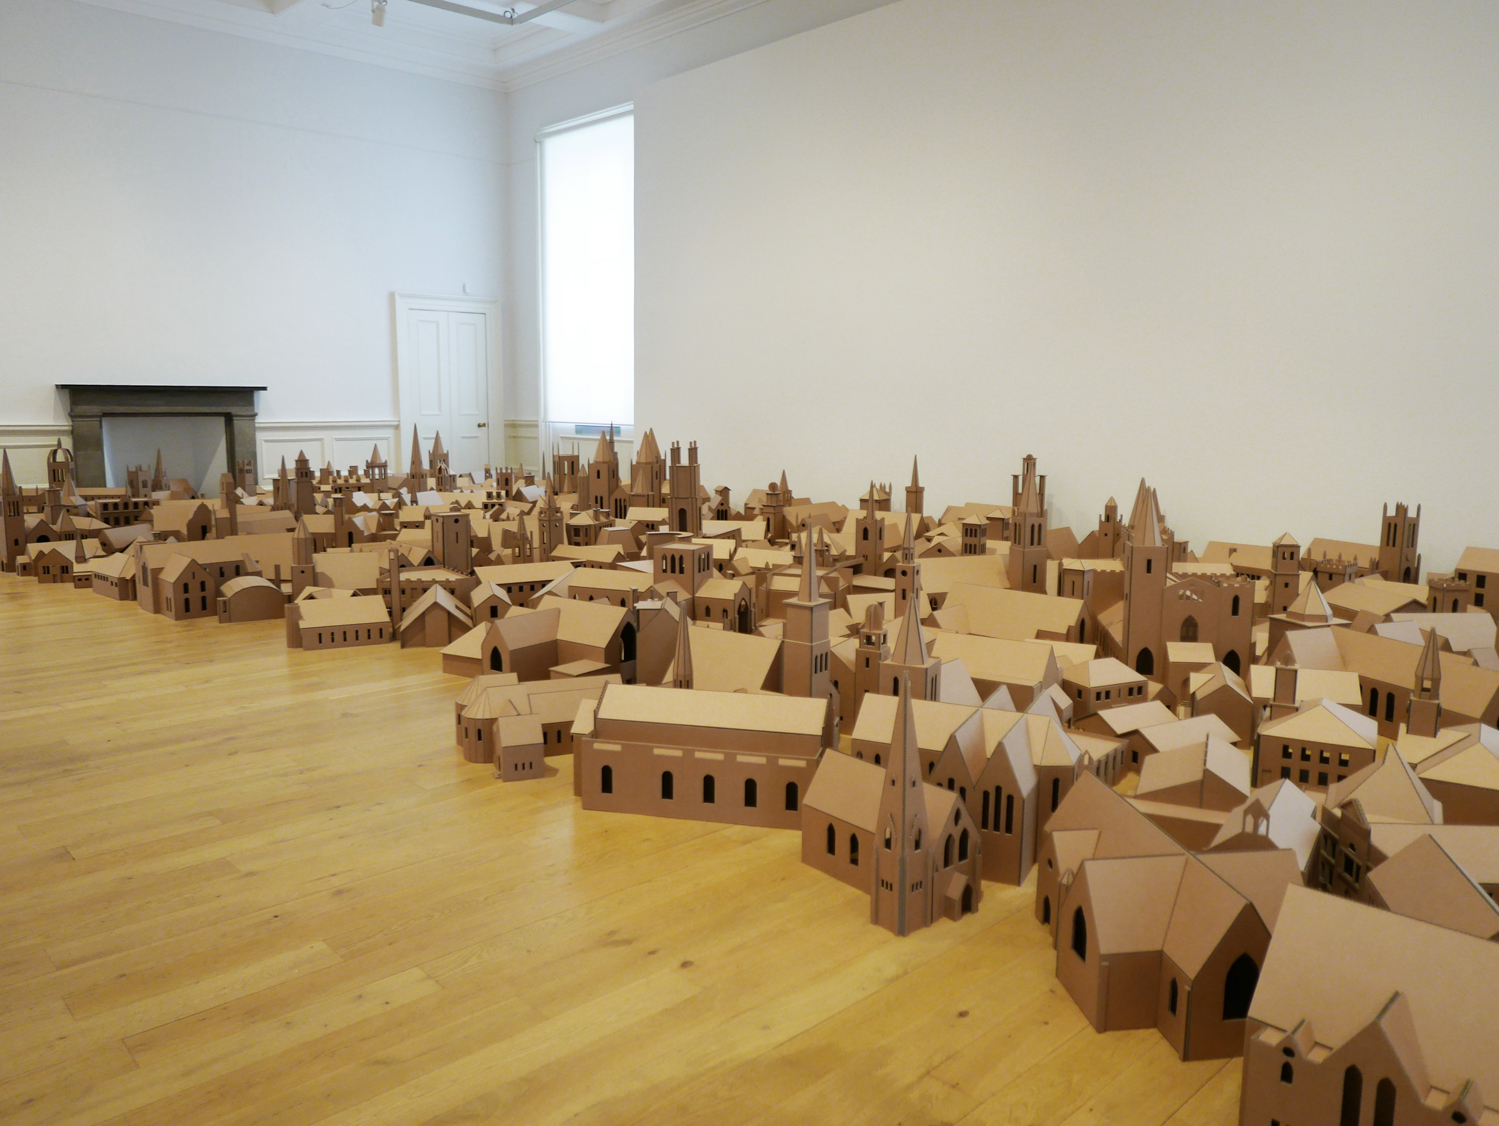 "The Lamp of Sacrifice, 286 Places of Worship, Edinburgh 2004" By Nathan Coley